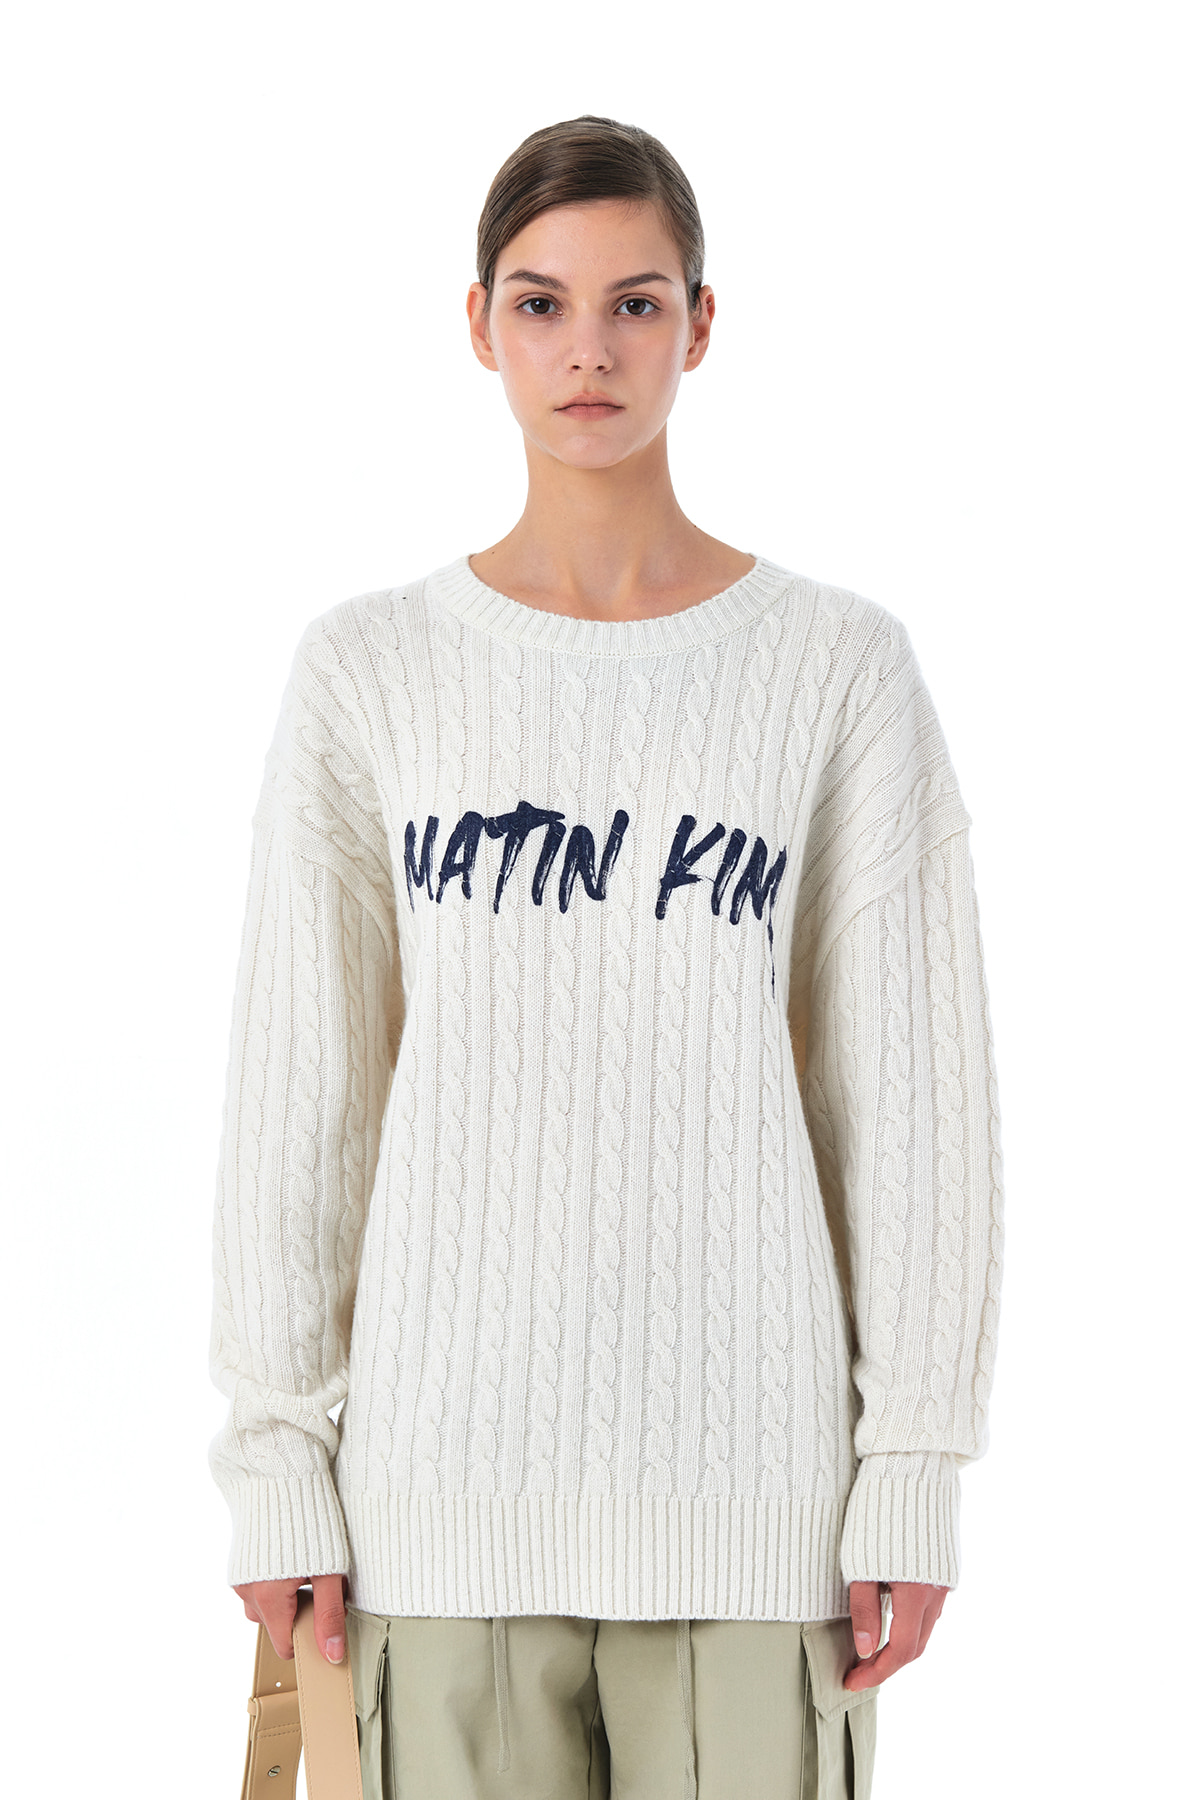 PAINTING LOGO CABLE PULLOVER IN IVORY